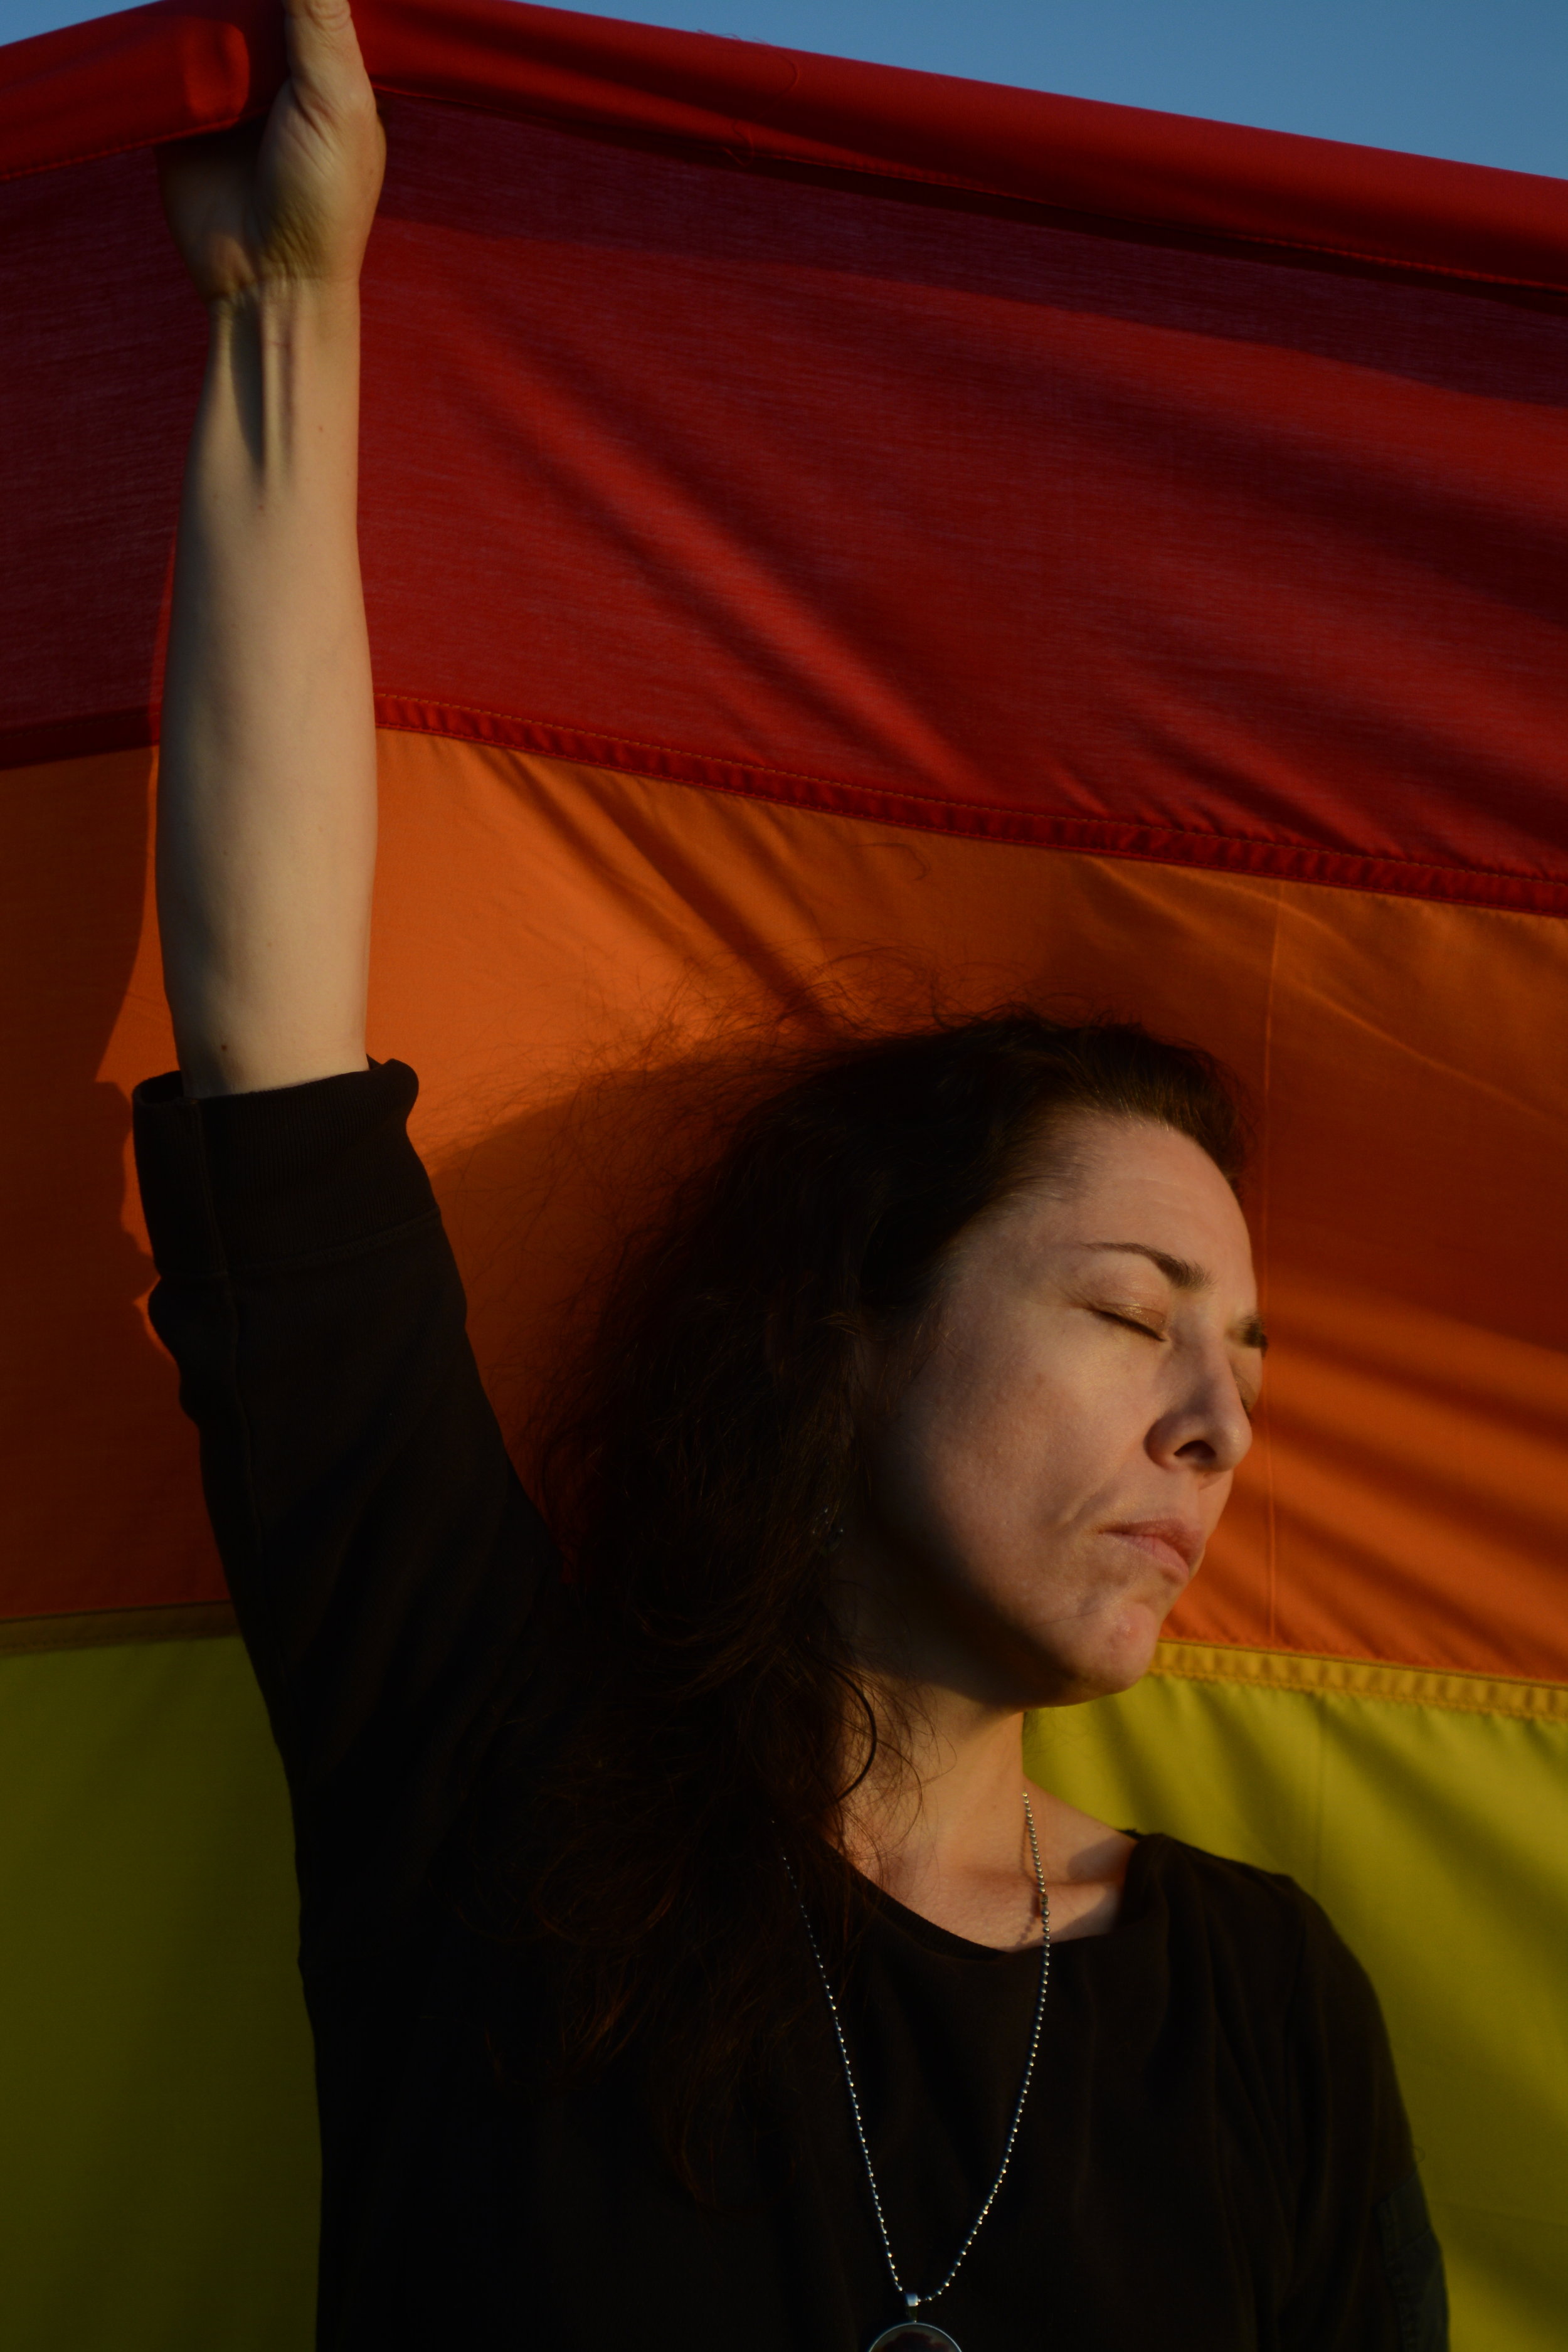  Carmelita Eggebrecht of Longwood, Florida, helps to hold up a 100 foot-long rainbow flag at the All Souls Catholic Church in Sanford, Florida, during the vigil of Luis Vielma, a victim of the Pulse nightclub shooting in Orlando. Eggebrecht and sever